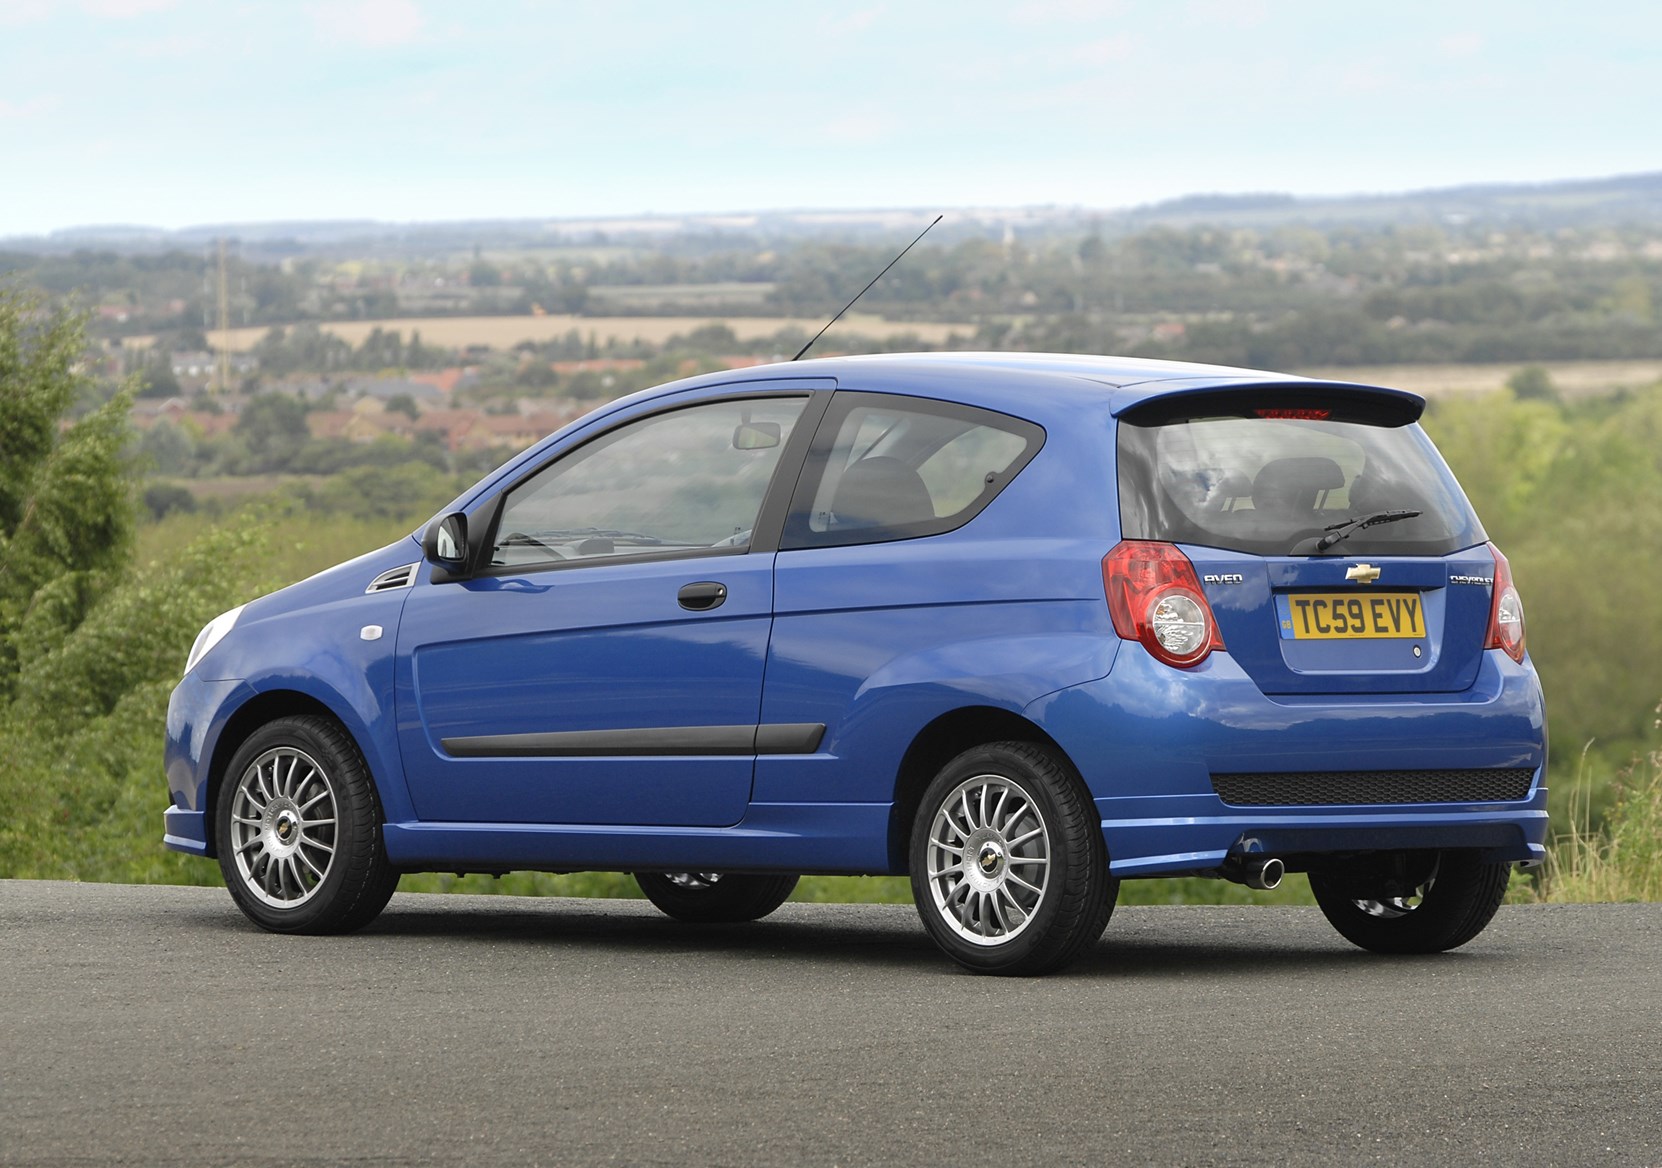 Chevrolet Aveo Hatchback Review (2008 2011) Parkers